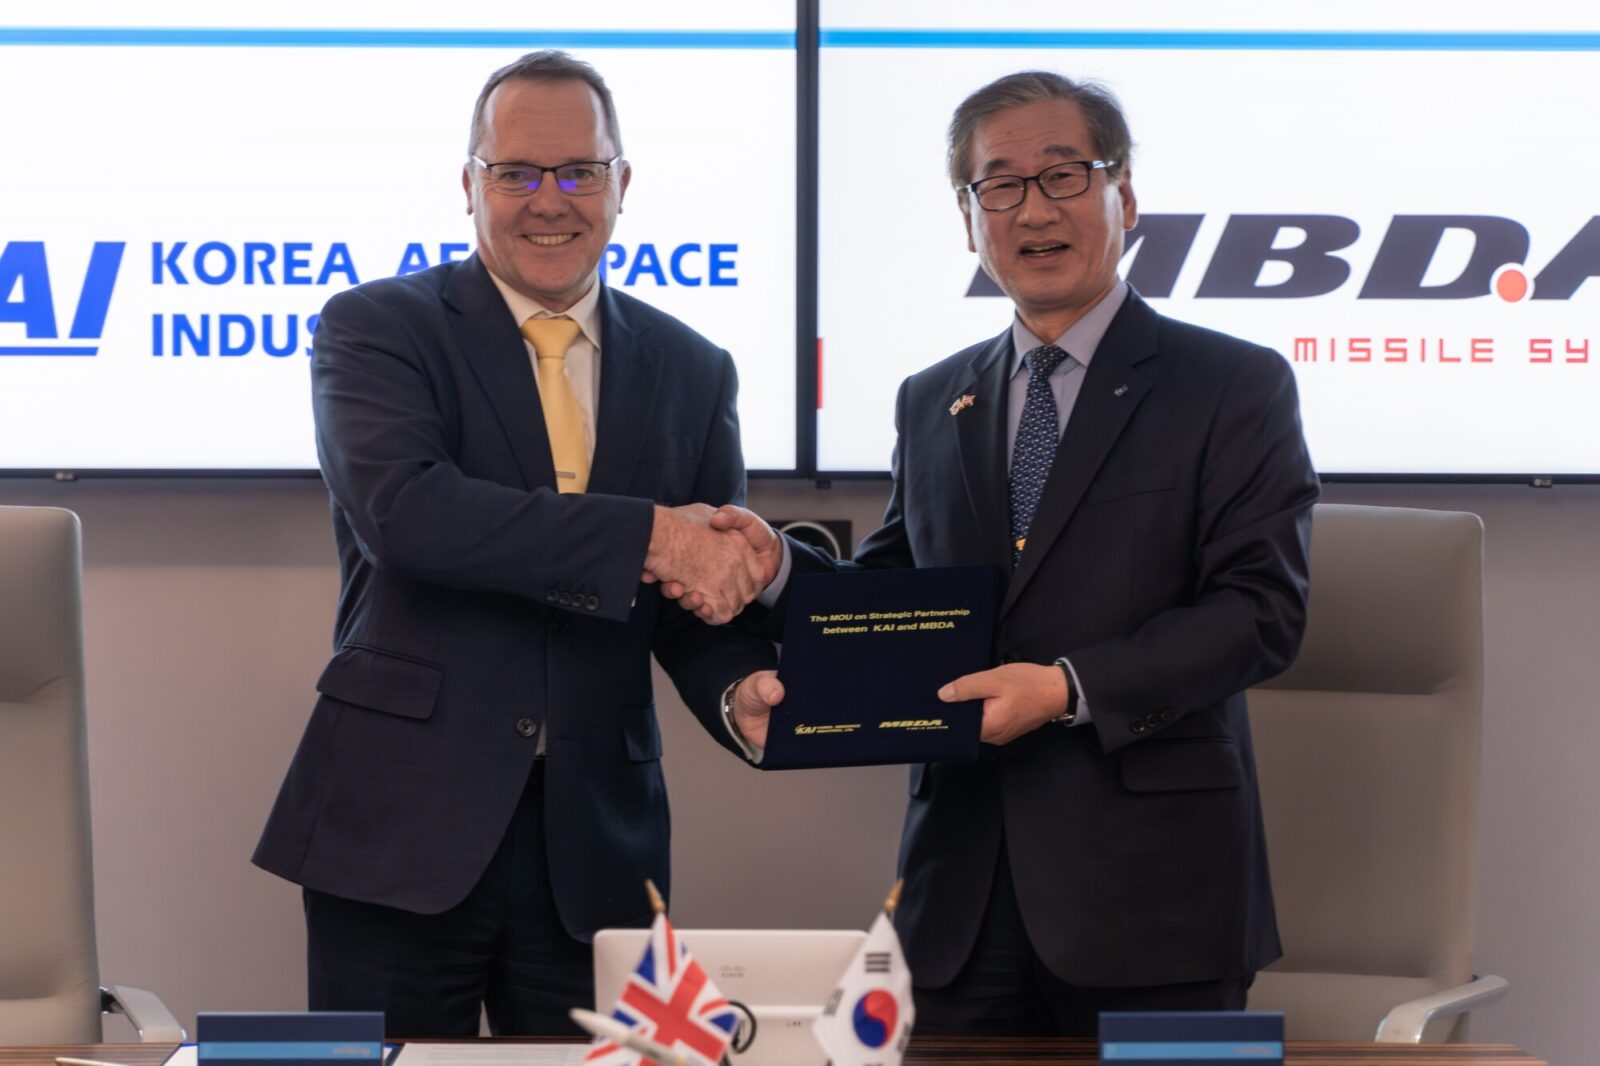 MBDA and Korean Aerospace Industries (KAI) have signed an agreement to deepen co-operation.